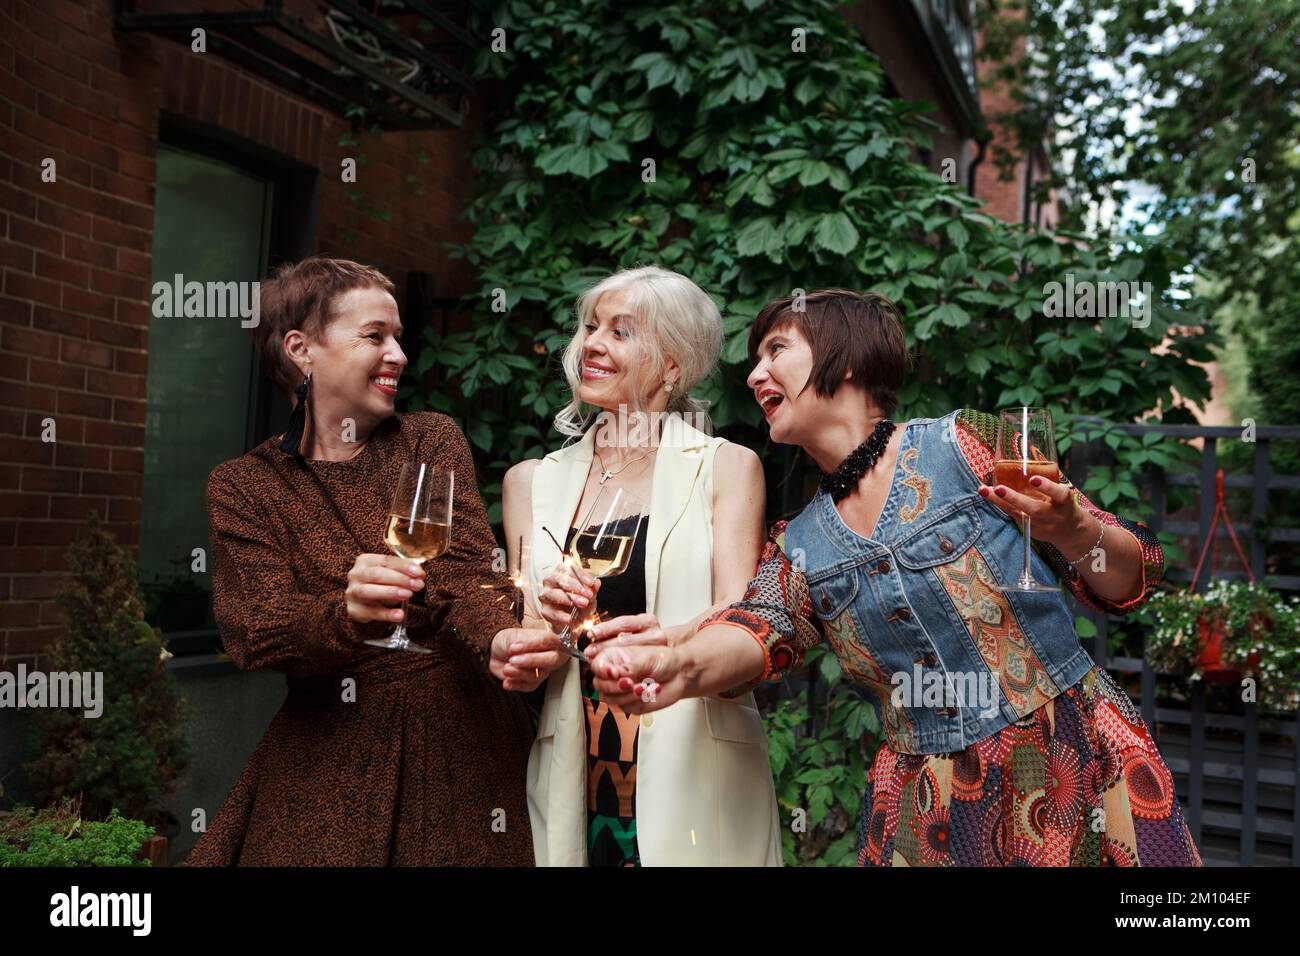 Friends of middle-aged women celebrate, have fun with sparklers and glasses of alcohol wine or champagne on outdoor party Stock Photo